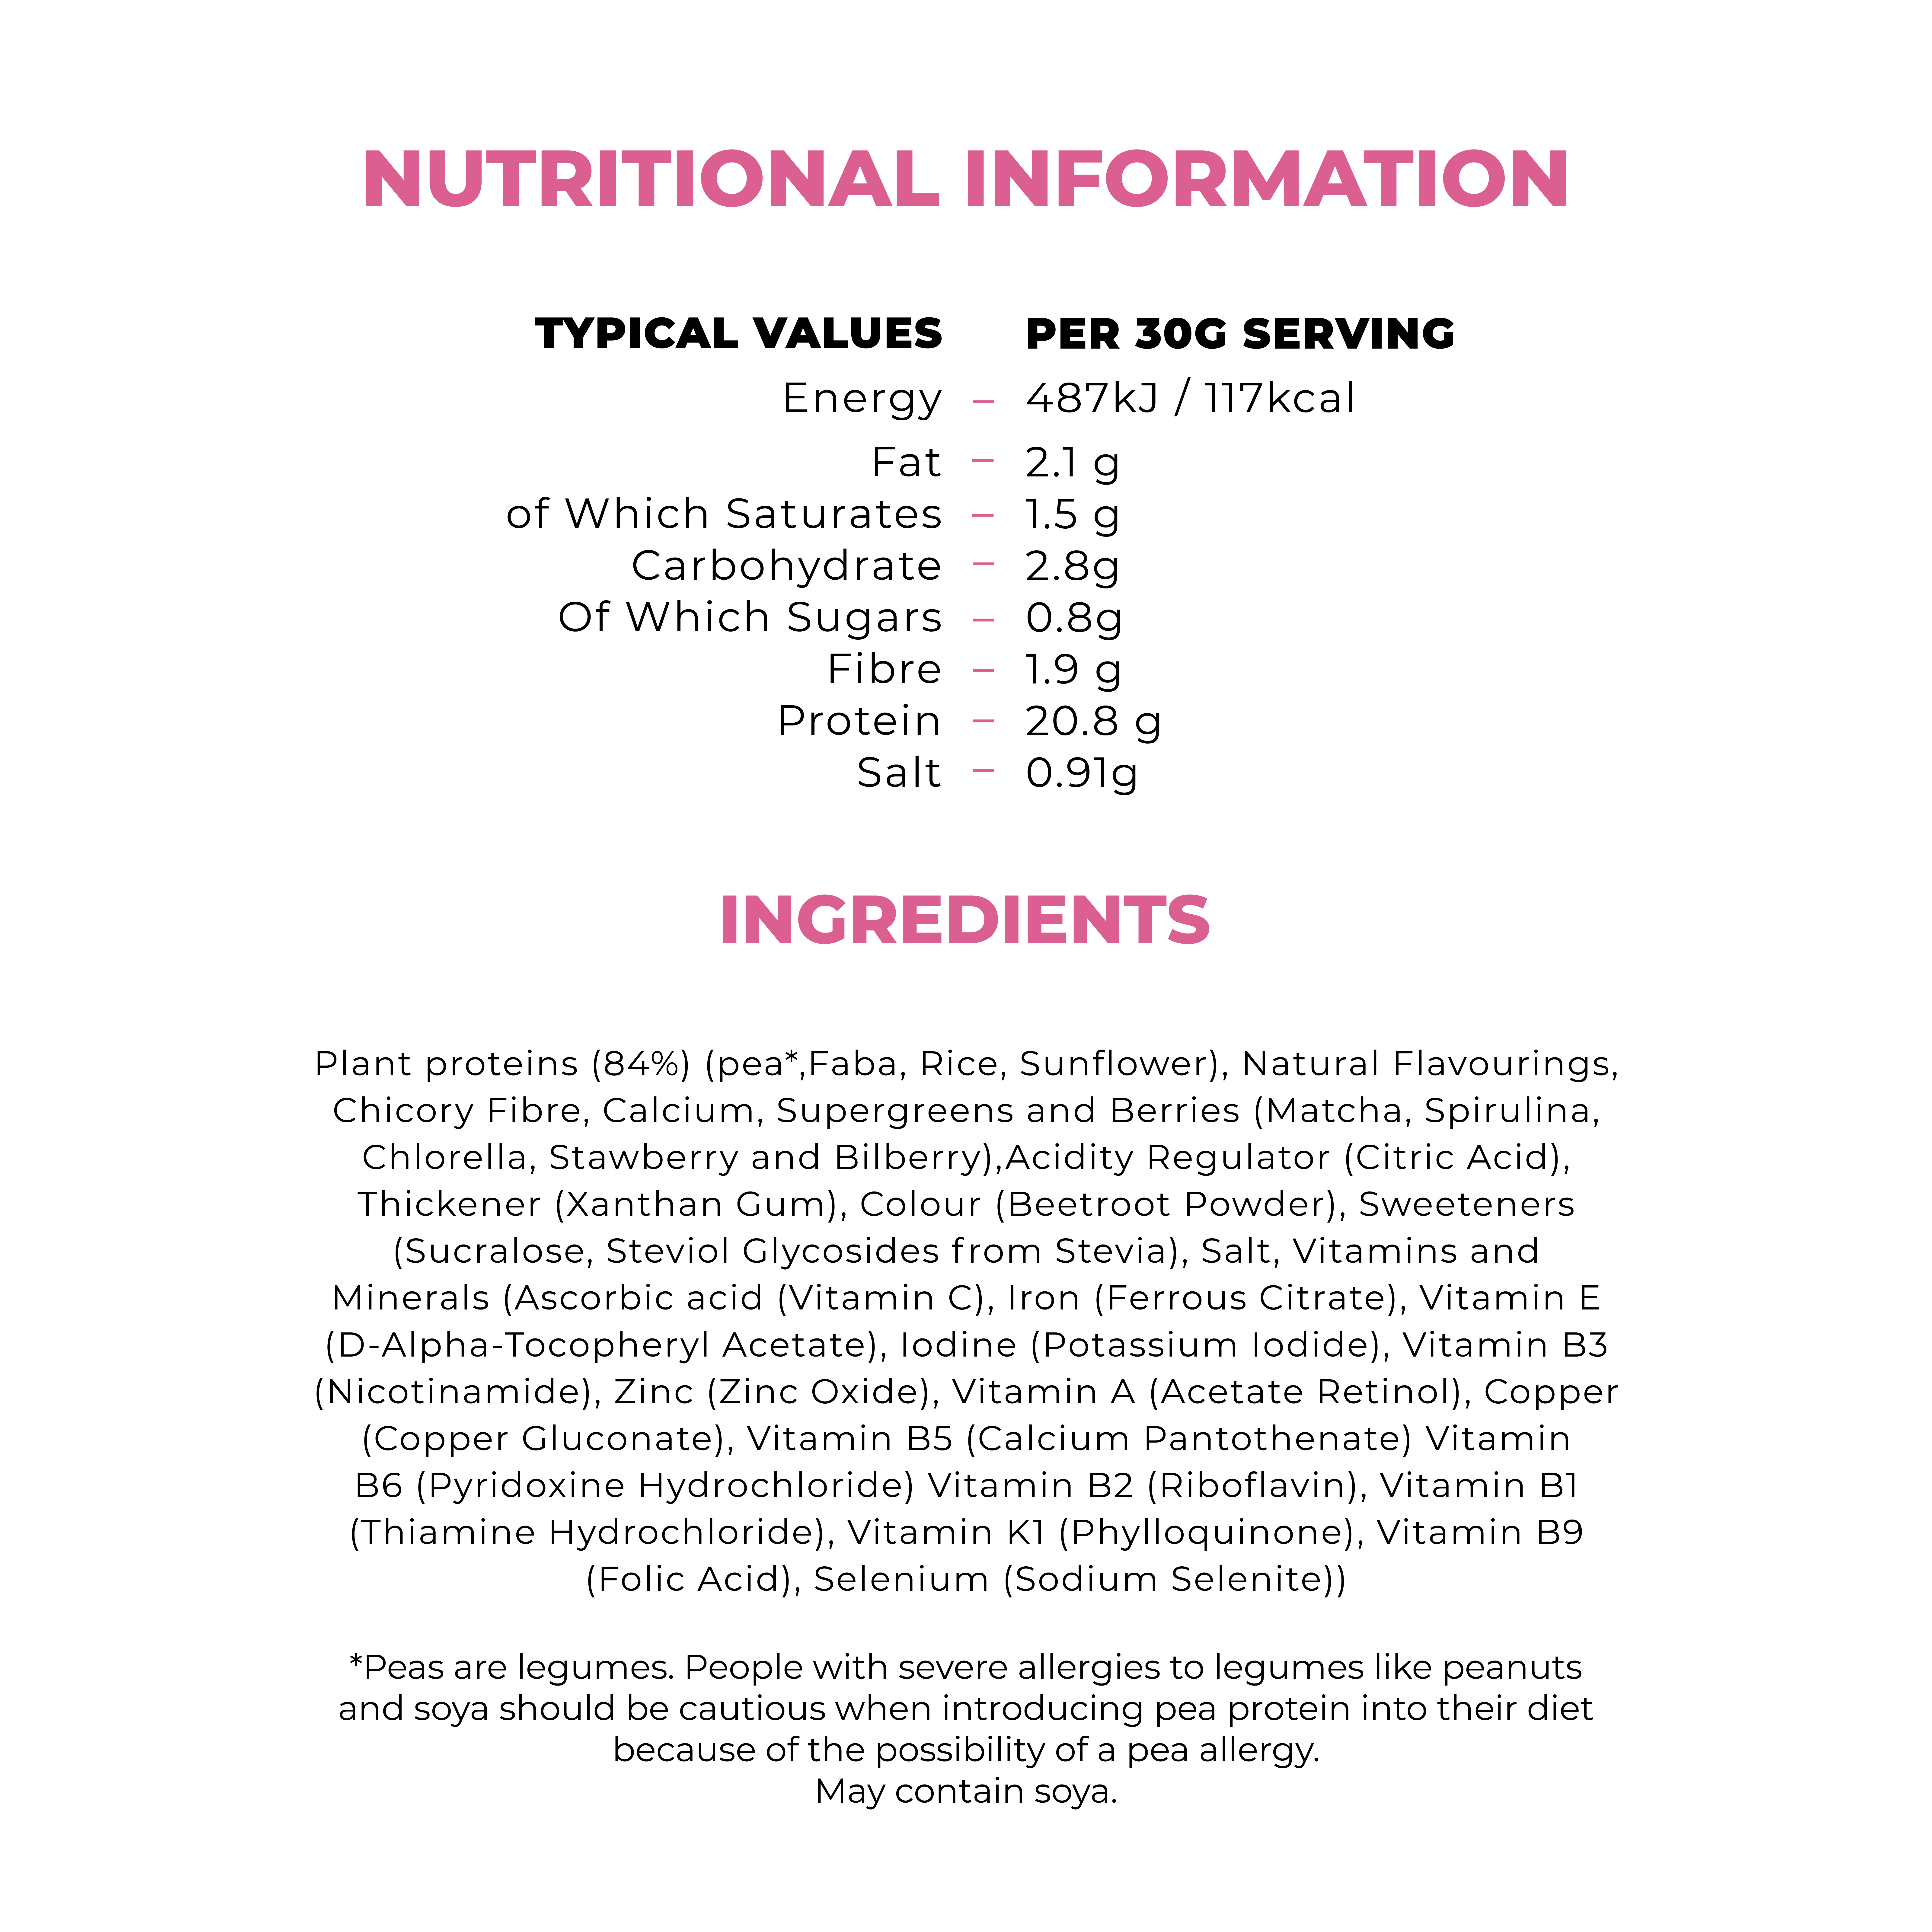 NUTRITIONAL INFORMATION TYPICAL VALUES. INGREDIENTS Plant proteins (84%) (pea,Faba, Rice, Sunflower), Natural Flavourings, Chicory Fibre, Calcium, Supergreens and Berries (Matcha, Spirulina, Chlorella, Stawberry and Bilberry), Acidity Regulator (Citric Acid), Thickener (Xanthan Gum), Colour (Beetroot Powder), Sweeteners (Sucralose, Steviol Glycosides from Stevia), Salt, Vitamins and Minerals (Ascorbic acid (Vitamin C), Iron (Ferrous Citrate), Vitamin E (D-Alpha-Tocopheryl Acetate), Iodine (Potassium lodide), Vitamin B3 (Nicotinamide), Zinc (Zinc Oxide), Vitamin A (Acetate Retinol), Copper (Copper Gluconate), Vitamin B5 (Calcium Pantothenate) Vitamin B6 (Pyridoxine Hydrochloride) Vitamin B2 (Riboflavin), Vitamin B1 (Thiamine Hydrochloride), Vitamin K1 (Phylloquinone), Vitamin B9 (Folic Acid), Selenium (Sodium Selenite) Peas are legumes. People with severe allergies to legumes like peanuts and soya should be cautious when introducing pea protein into their diet because of the possibility of a pea allergy. May contain soya.